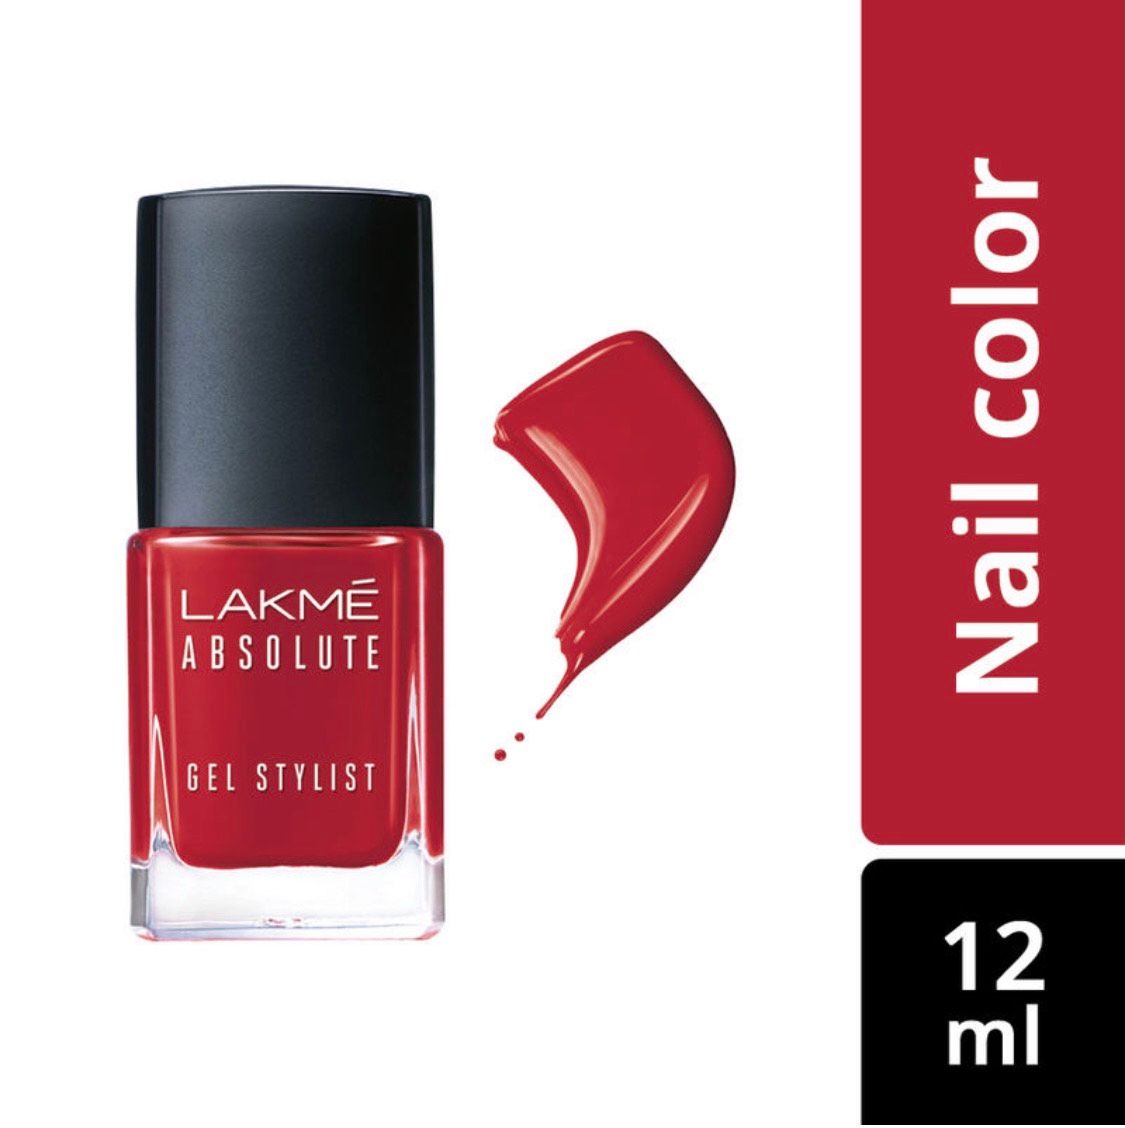 Buy Lakme Absolute Gel Stylist Nail Color Online at Best Price of Rs 255.75  - bigbasket